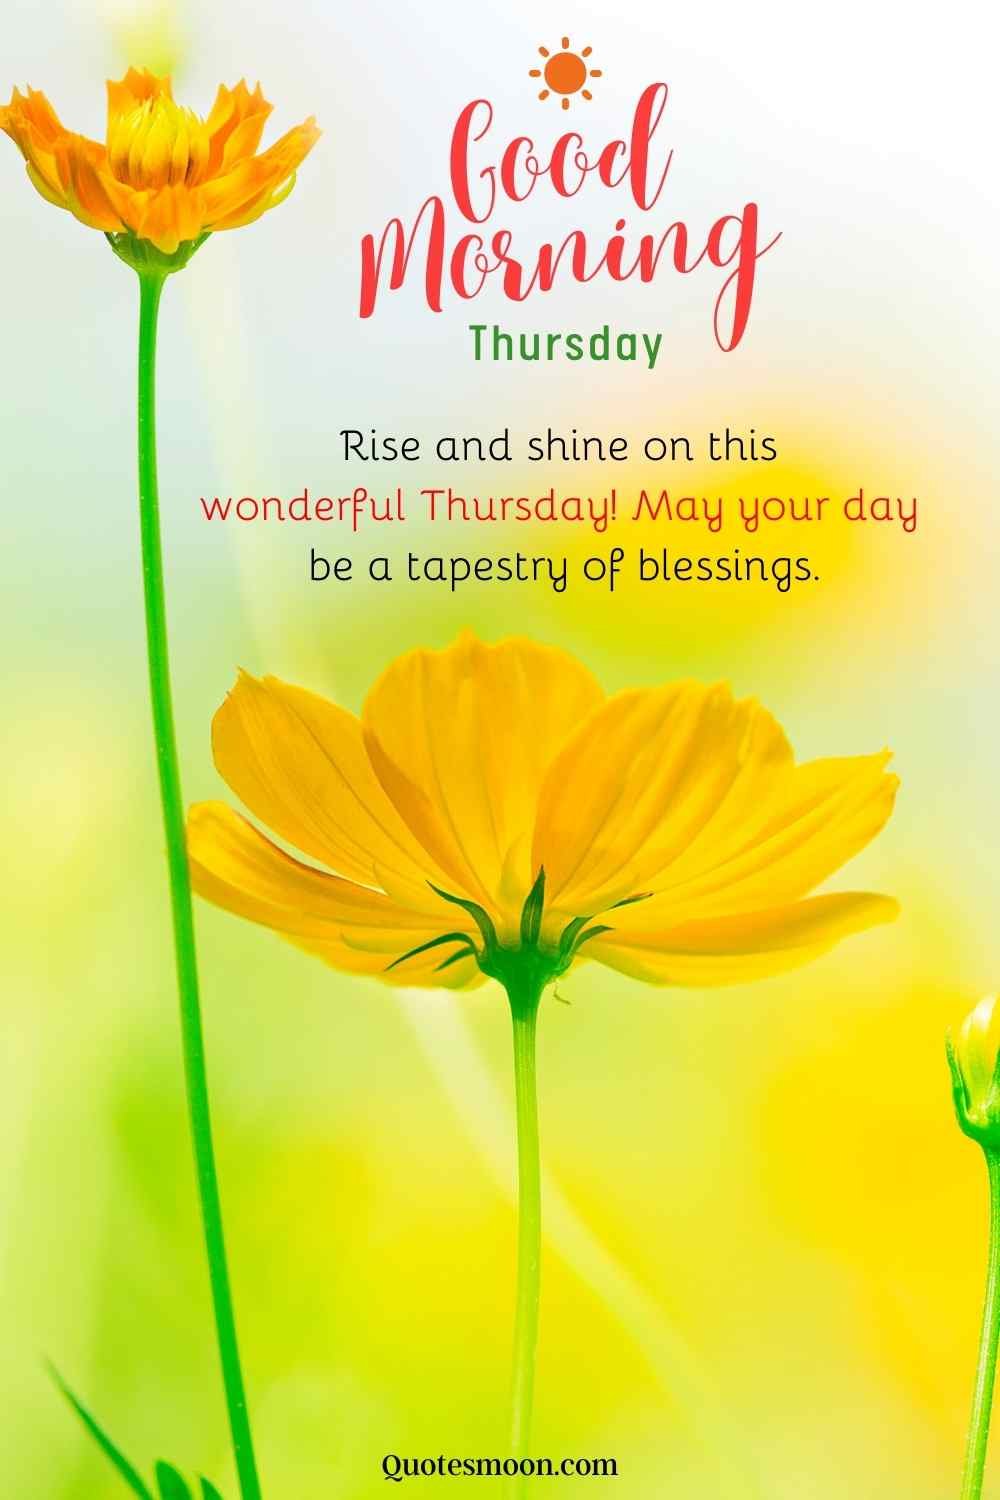 beautiful good morning thursday blessings pic